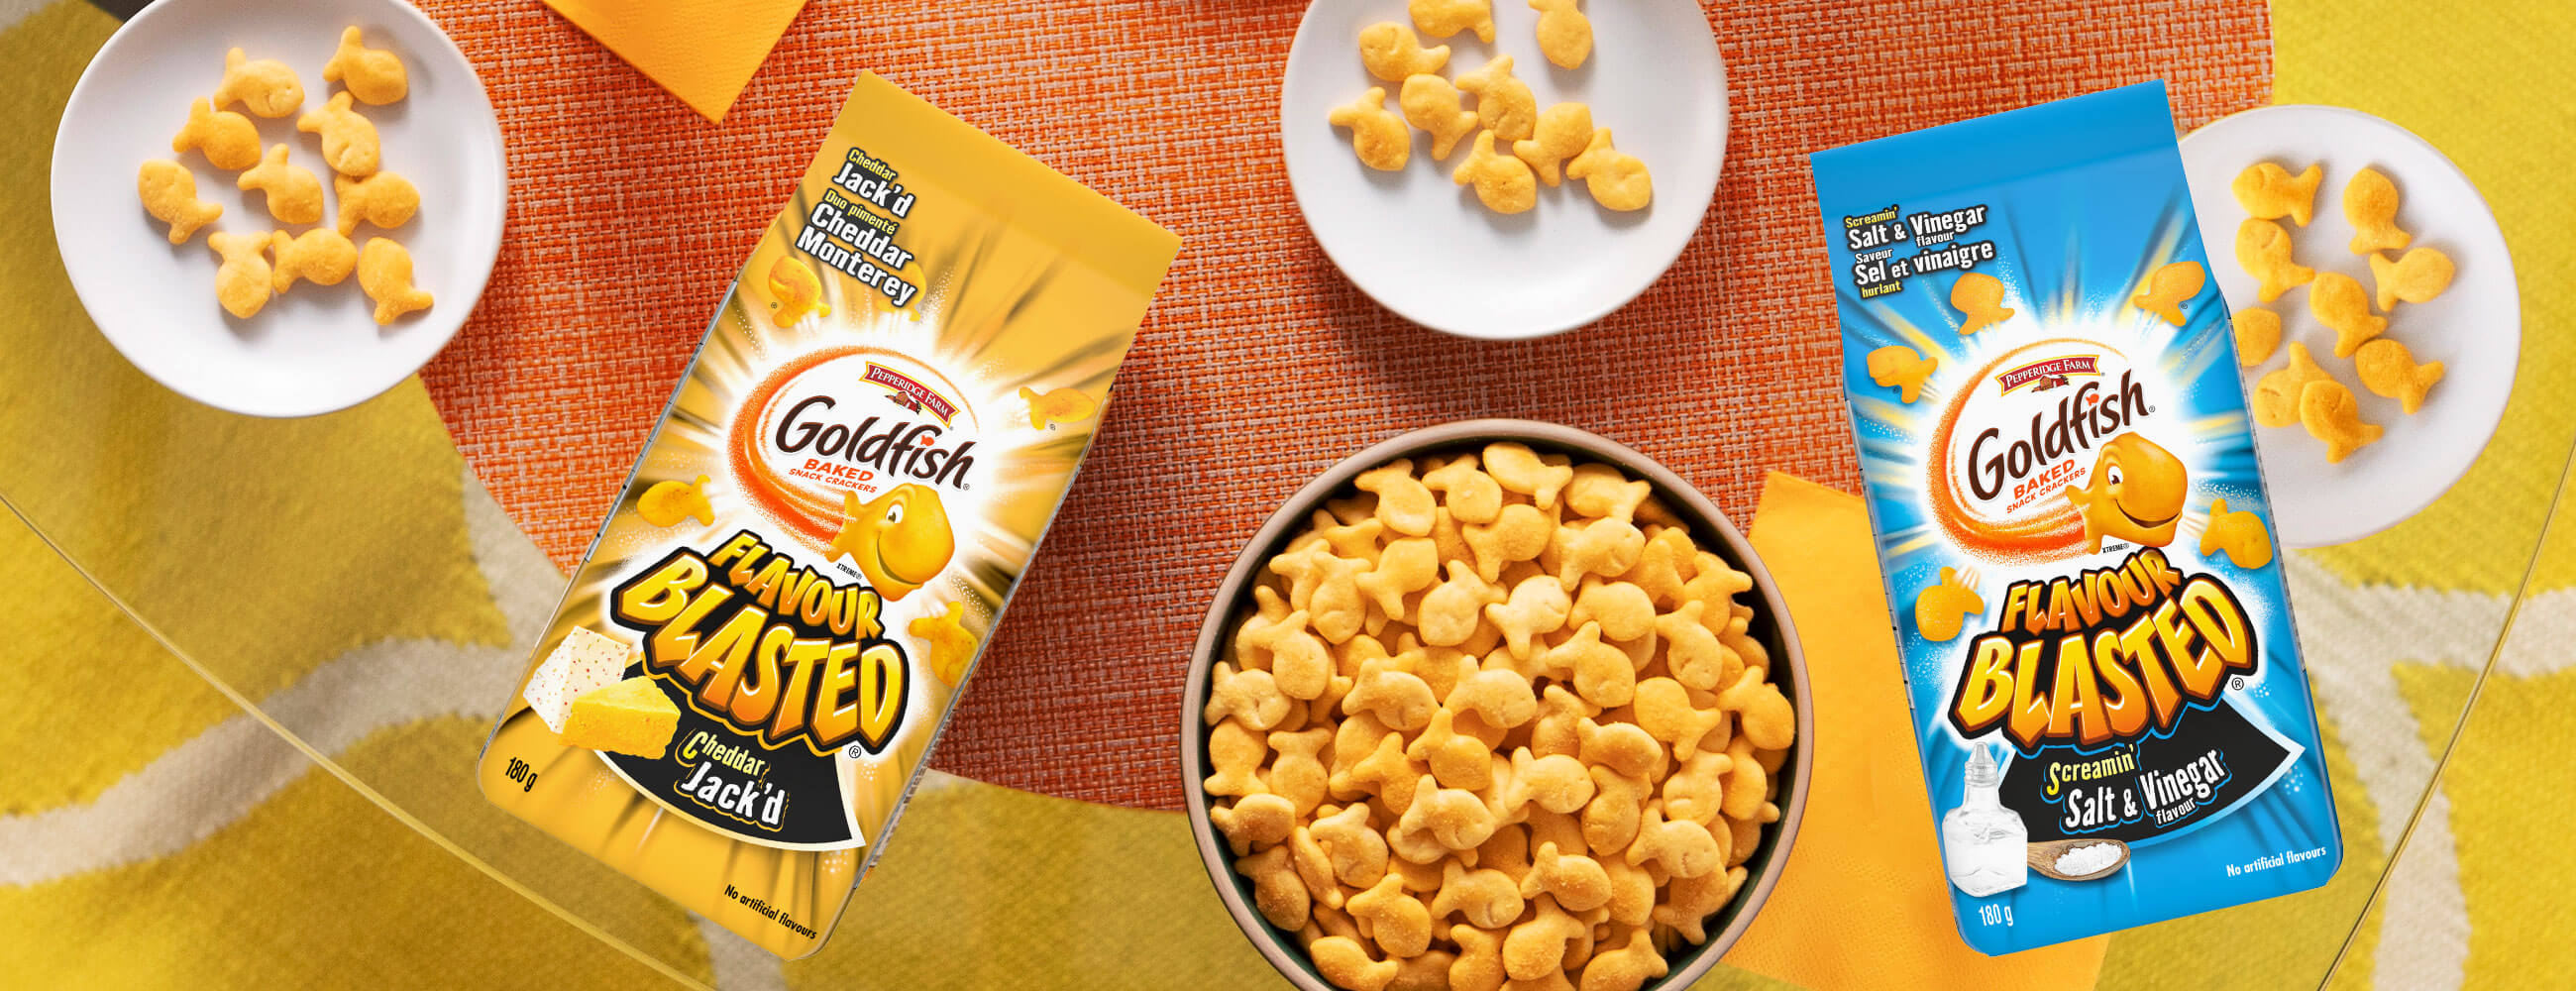 Goldfish® Flavour Blasted® Cheddar Jack'd and Screamin' Salt & Vinegar on table with bowls of Goldfish® crackers